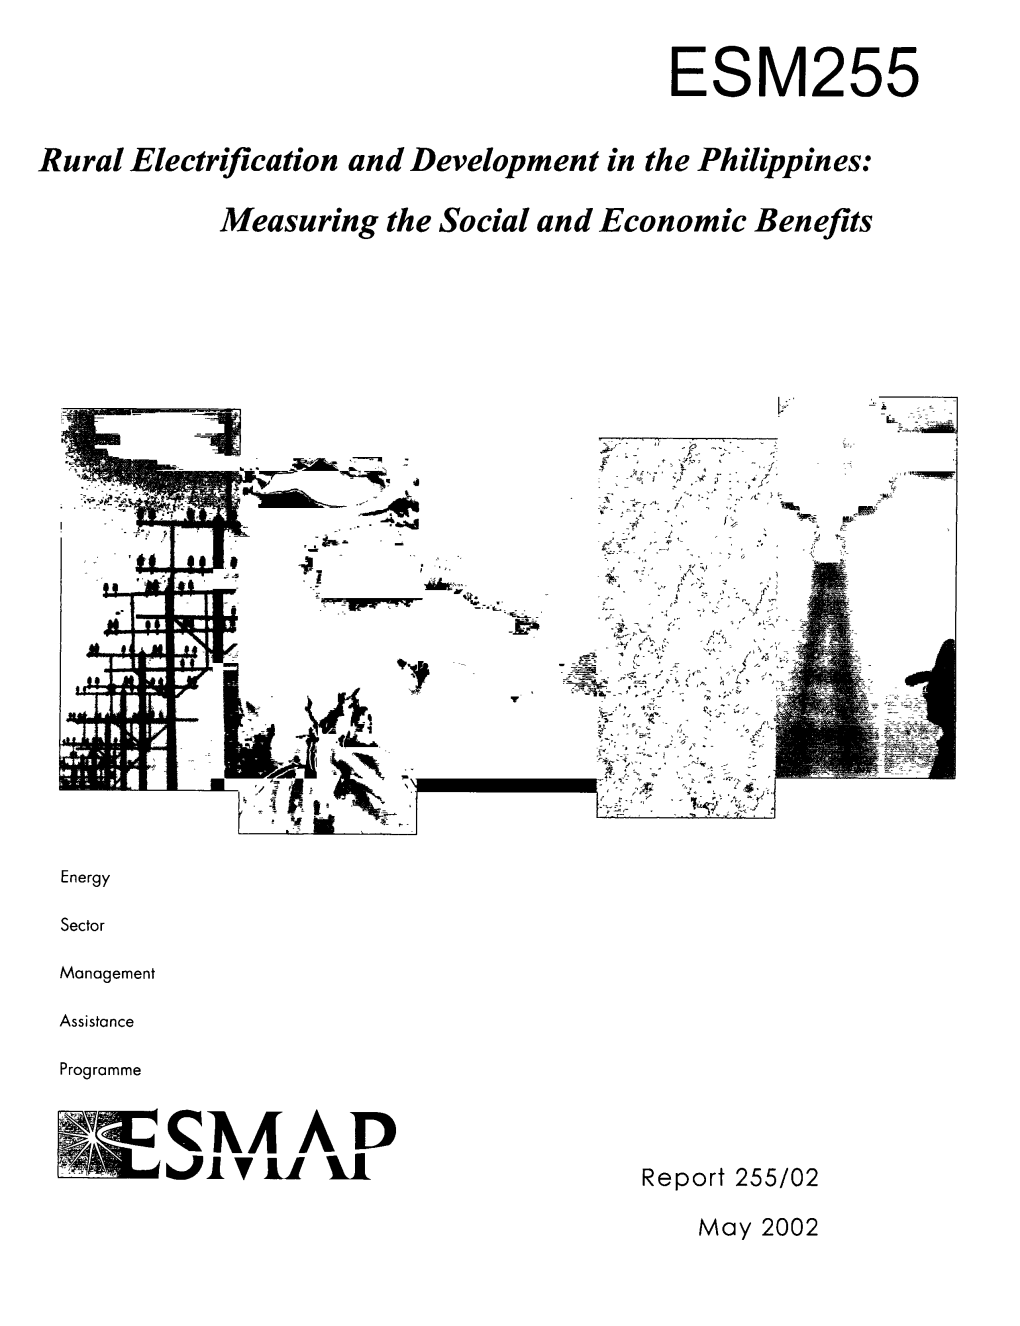 Rural Electrification and Development in the Philippines: Measuring the Social and Economic Benefits